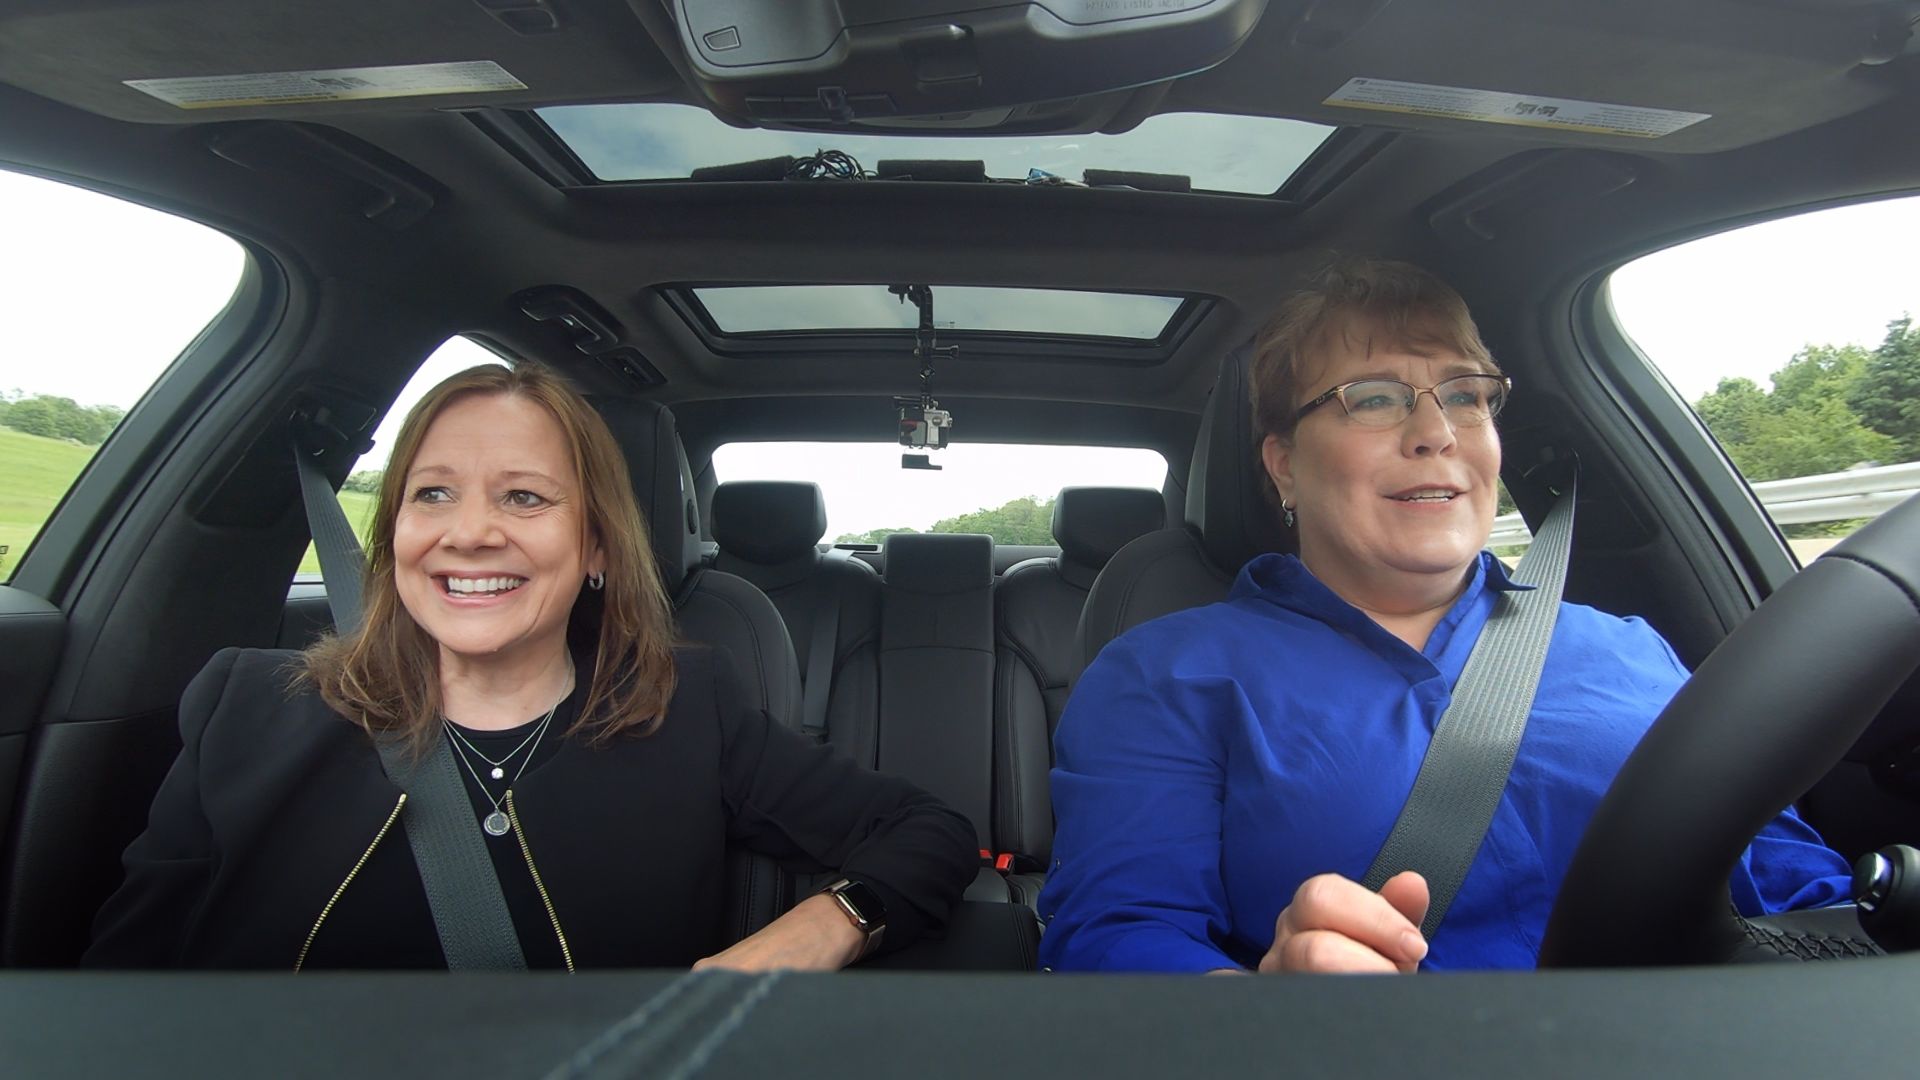 Image of GM CEO Mary Barra and Axios reporter Joann Muller driving in a car